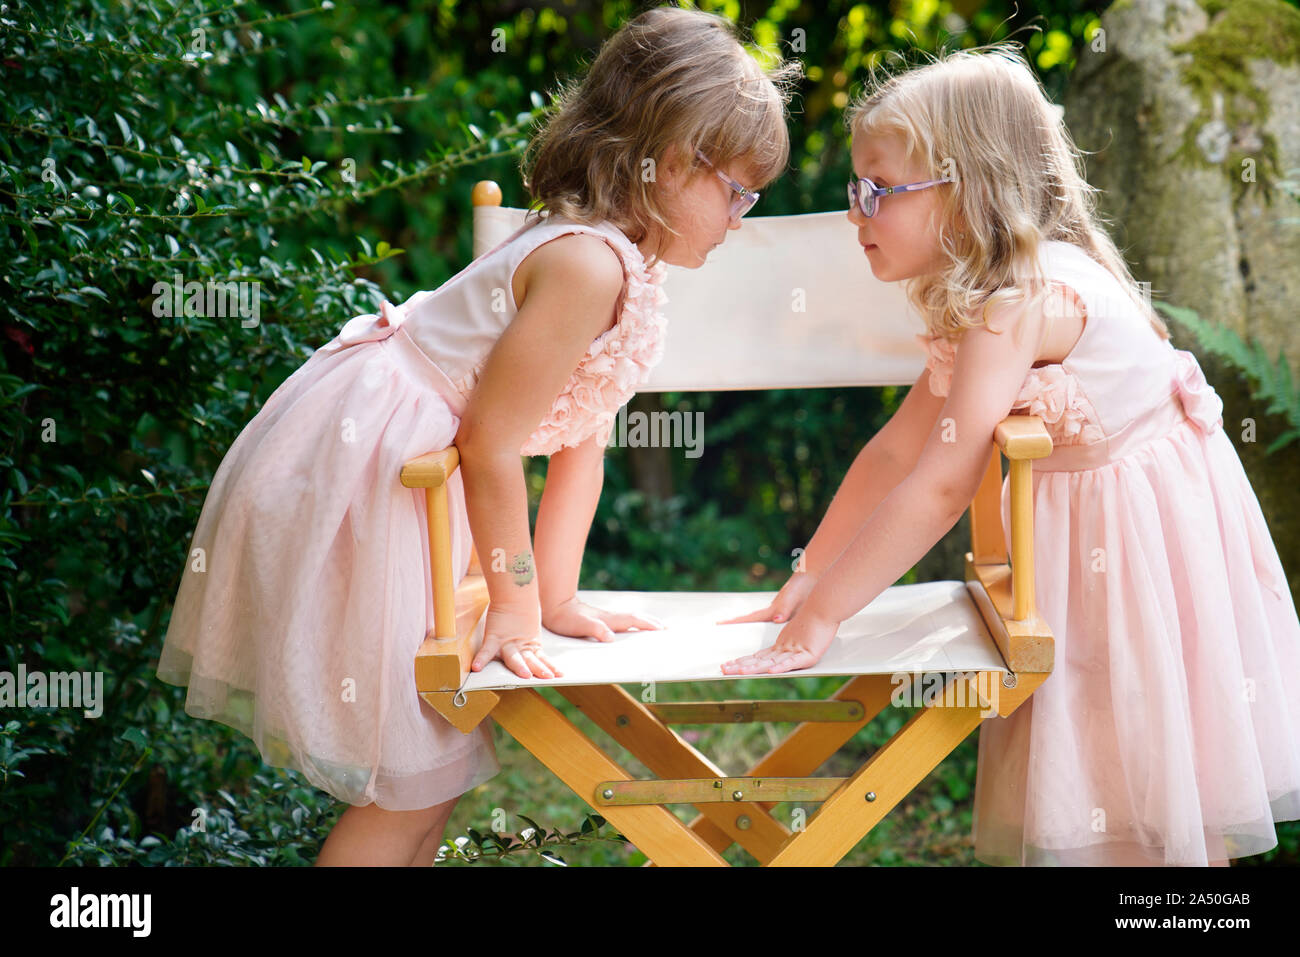 6 years old, 3 years old, Two Girls Siblings, Portrait, Karlovy Vary, Czech Republic Stock Photo